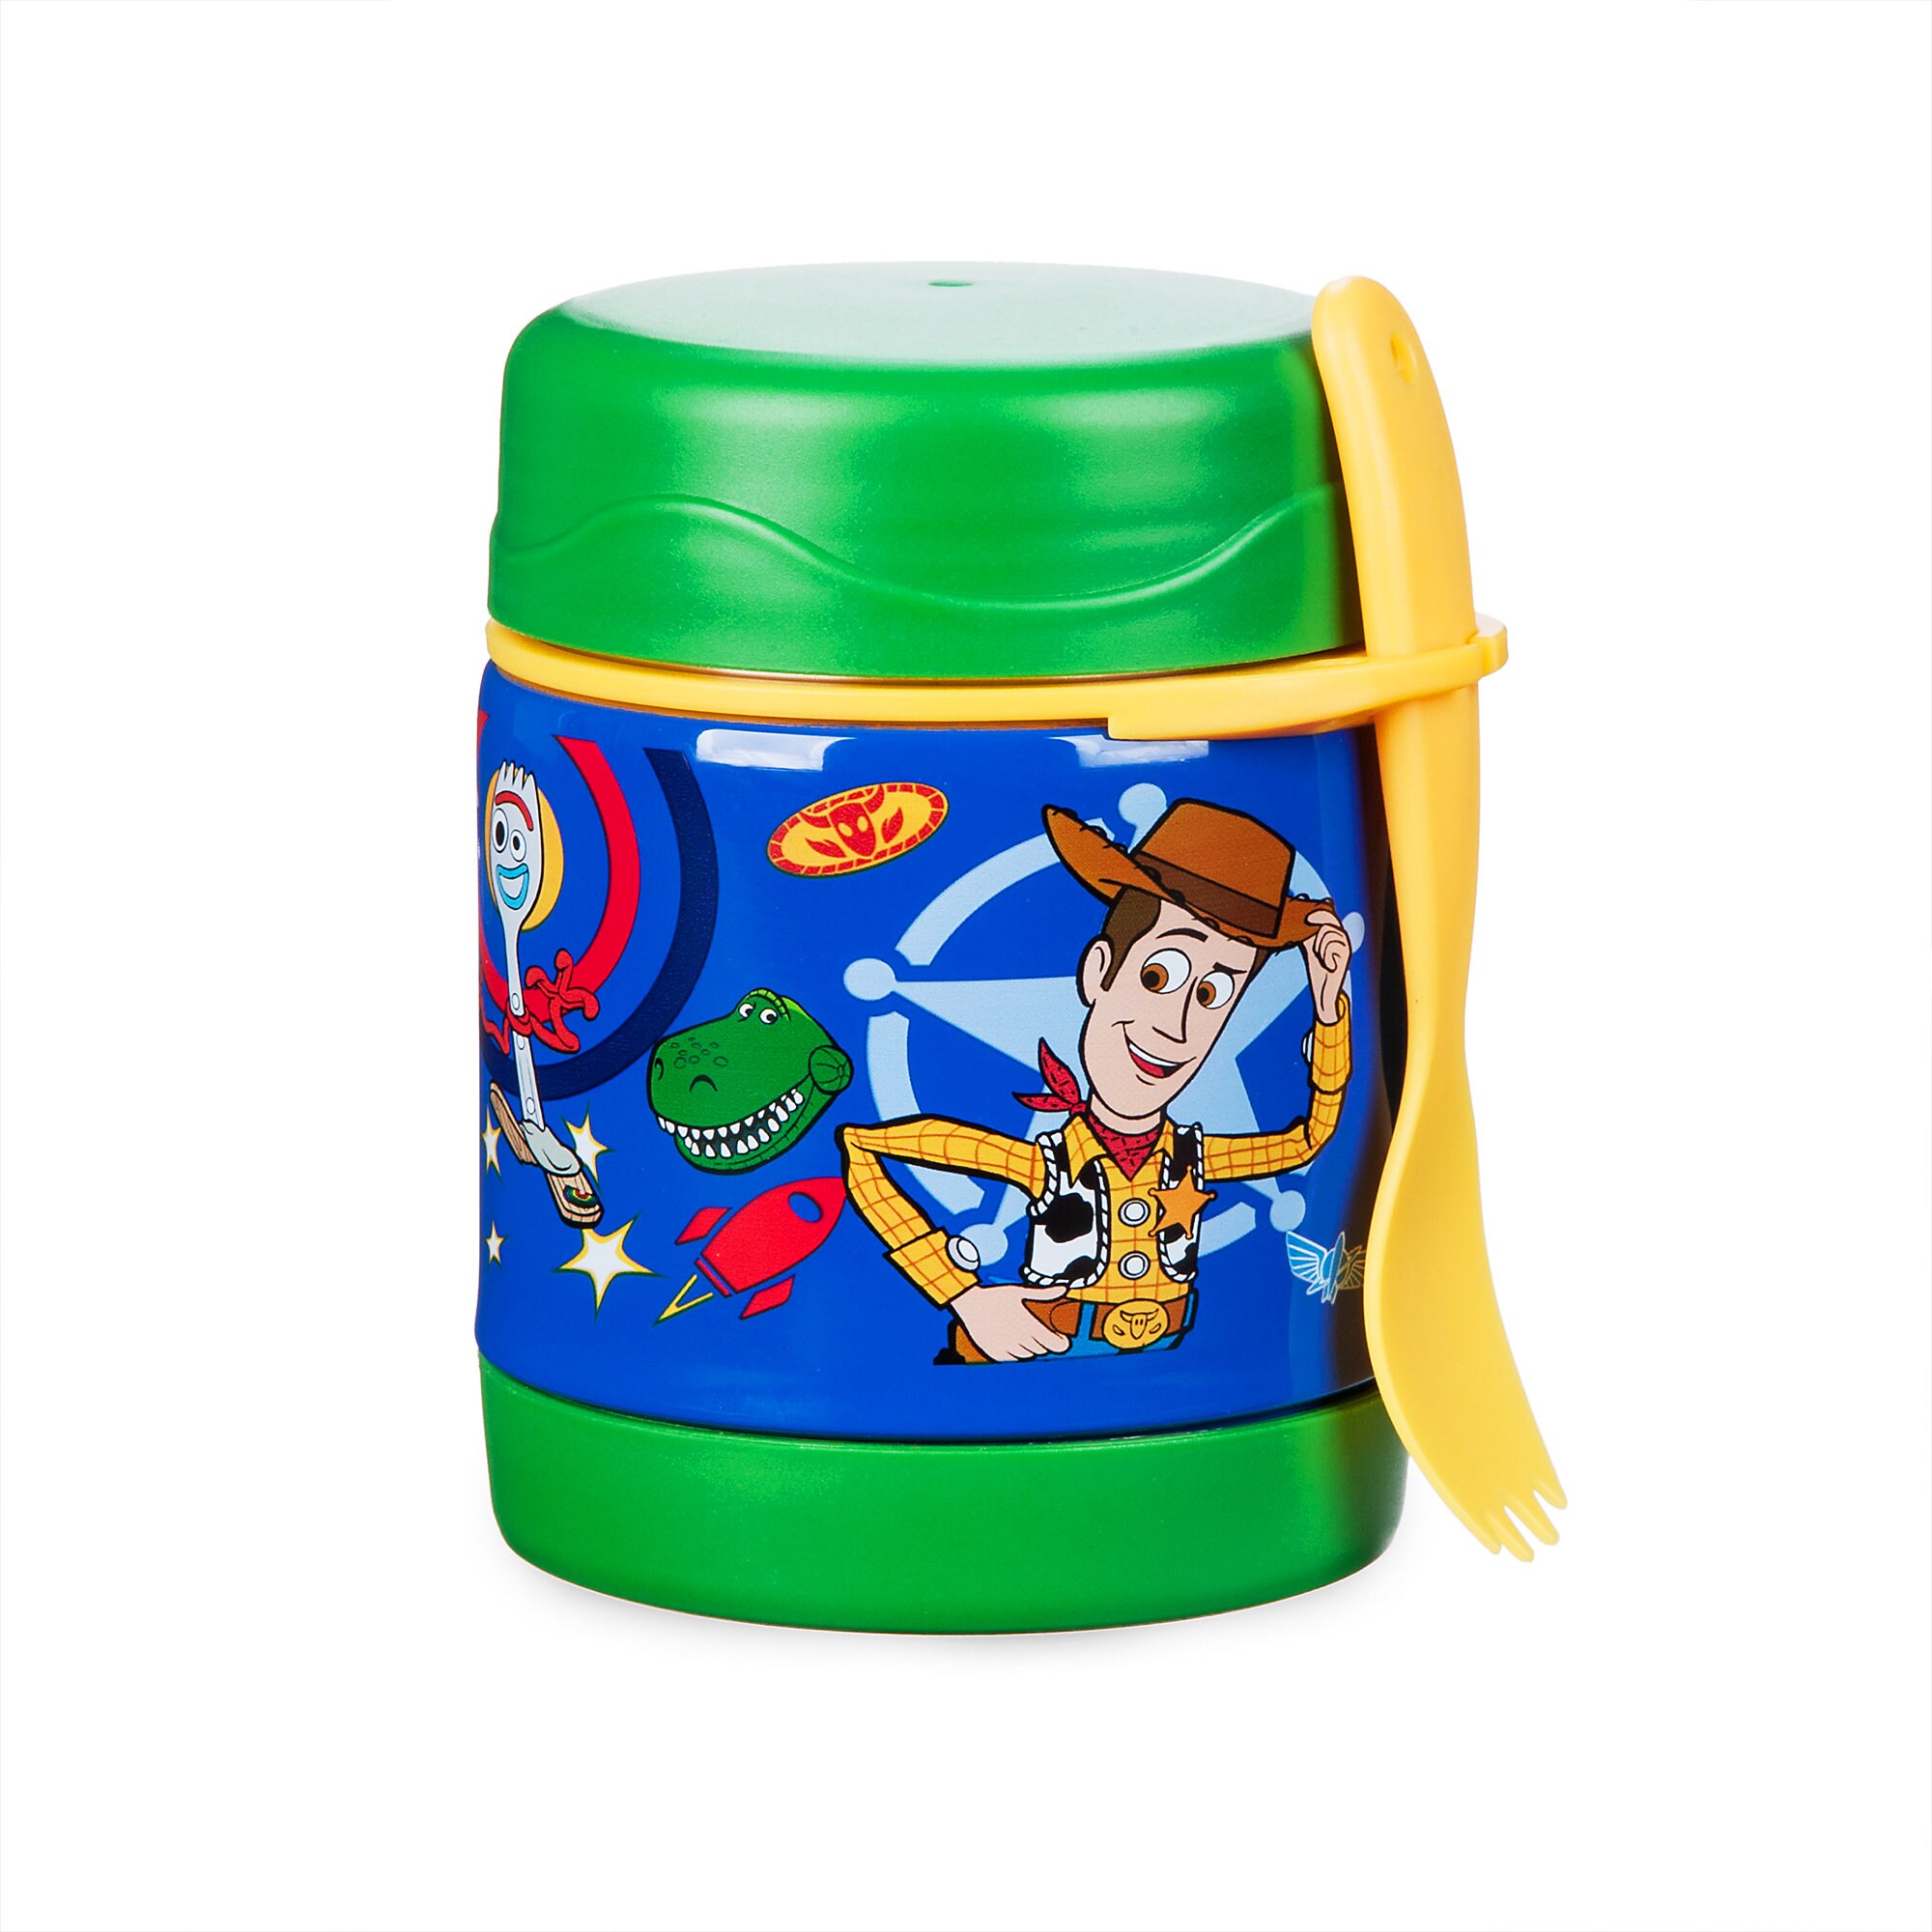 Toy Story 4 Hot and Cold Food Container